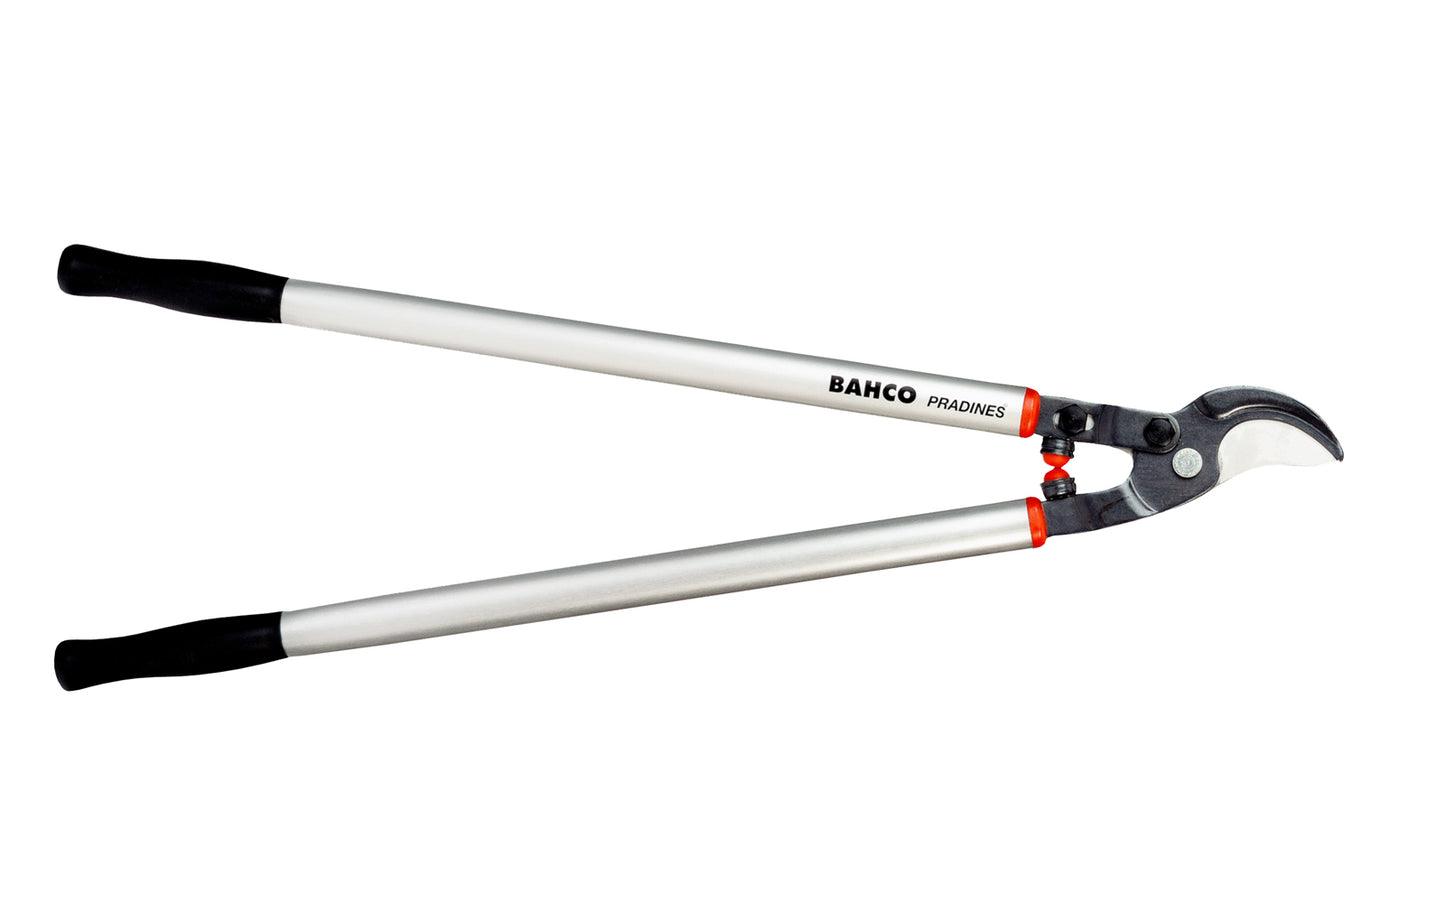 Bahco 32" Professional Bypass Loppers with Aluminum Handles are long reach bypass loppers excellent for use on fruit trees & in the orchard. Great loppers for landscaping work. Long & lightweight handles are good for overhead cutting. Fully-hardened cutting blade. Model P280-SL-80. Made in France. 